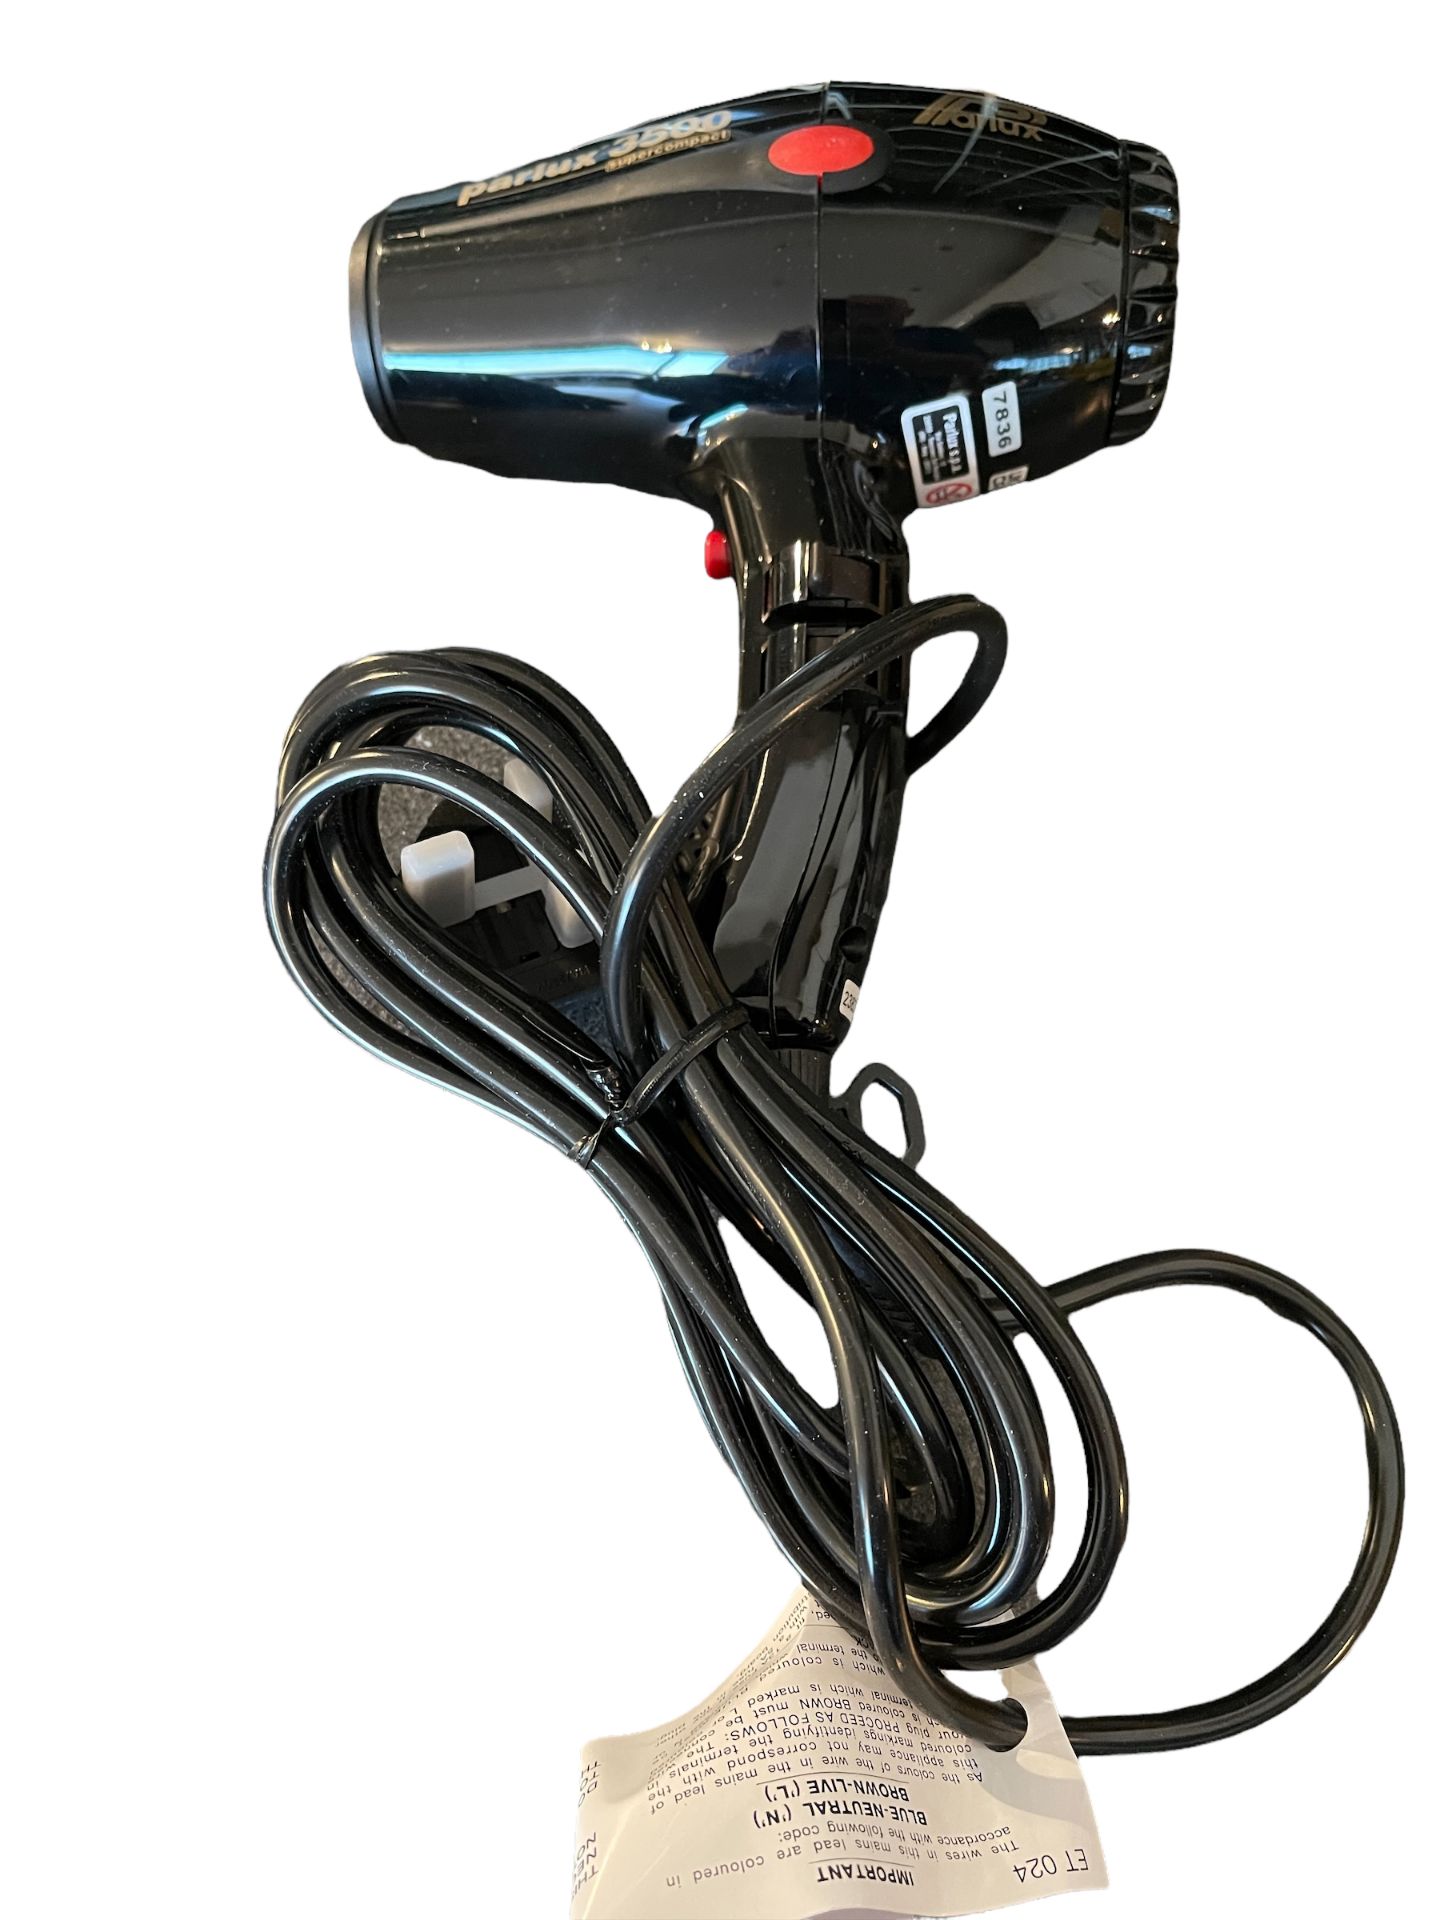 Parlux 3500 Supercompact Professional Hairdryer RRP £249 - Ex Demo or Surplus Stock from Private... - Image 8 of 11